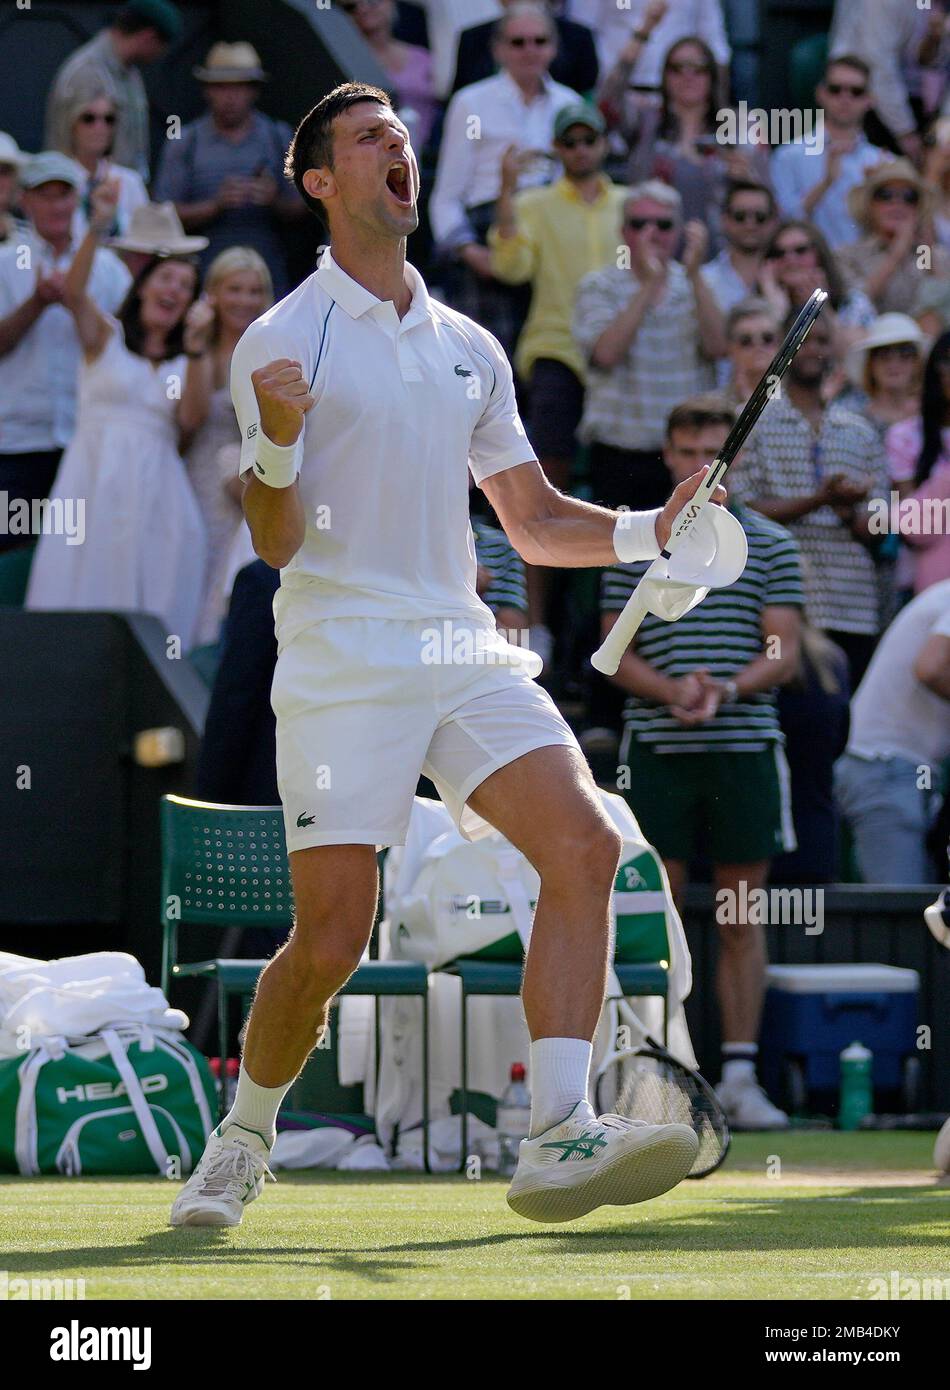 Serbias Novak Djokovic celebrates after beating Britains Cameron Norrie in a mens singles semifinal on day twelve of the Wimbledon tennis championships in London, Friday, July 8, 2022